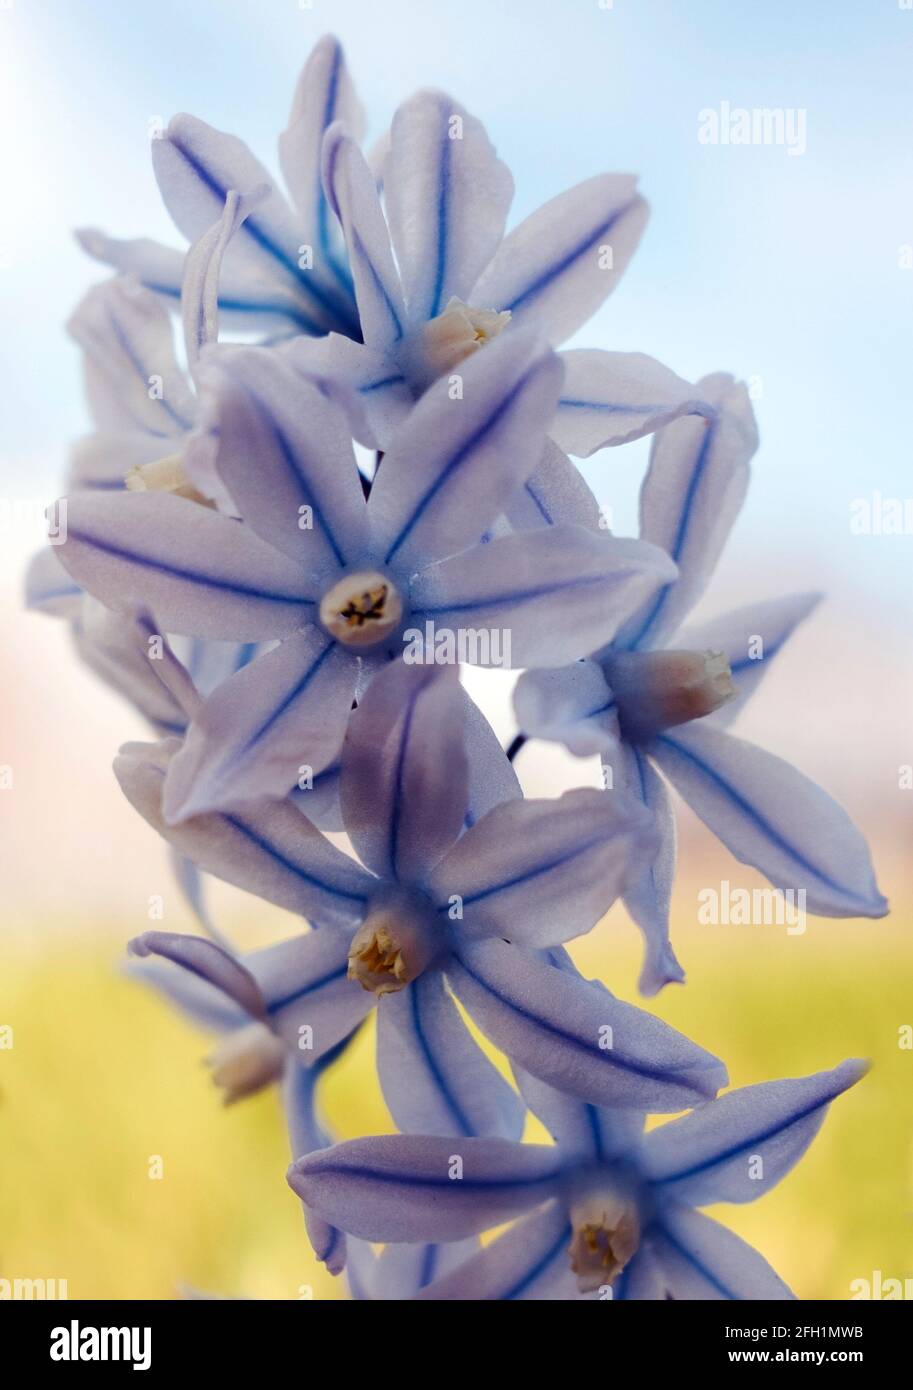 Puschkinia scilloides, commonly known as striped squill or Lebanon squill flowers in closeup Stock Photo